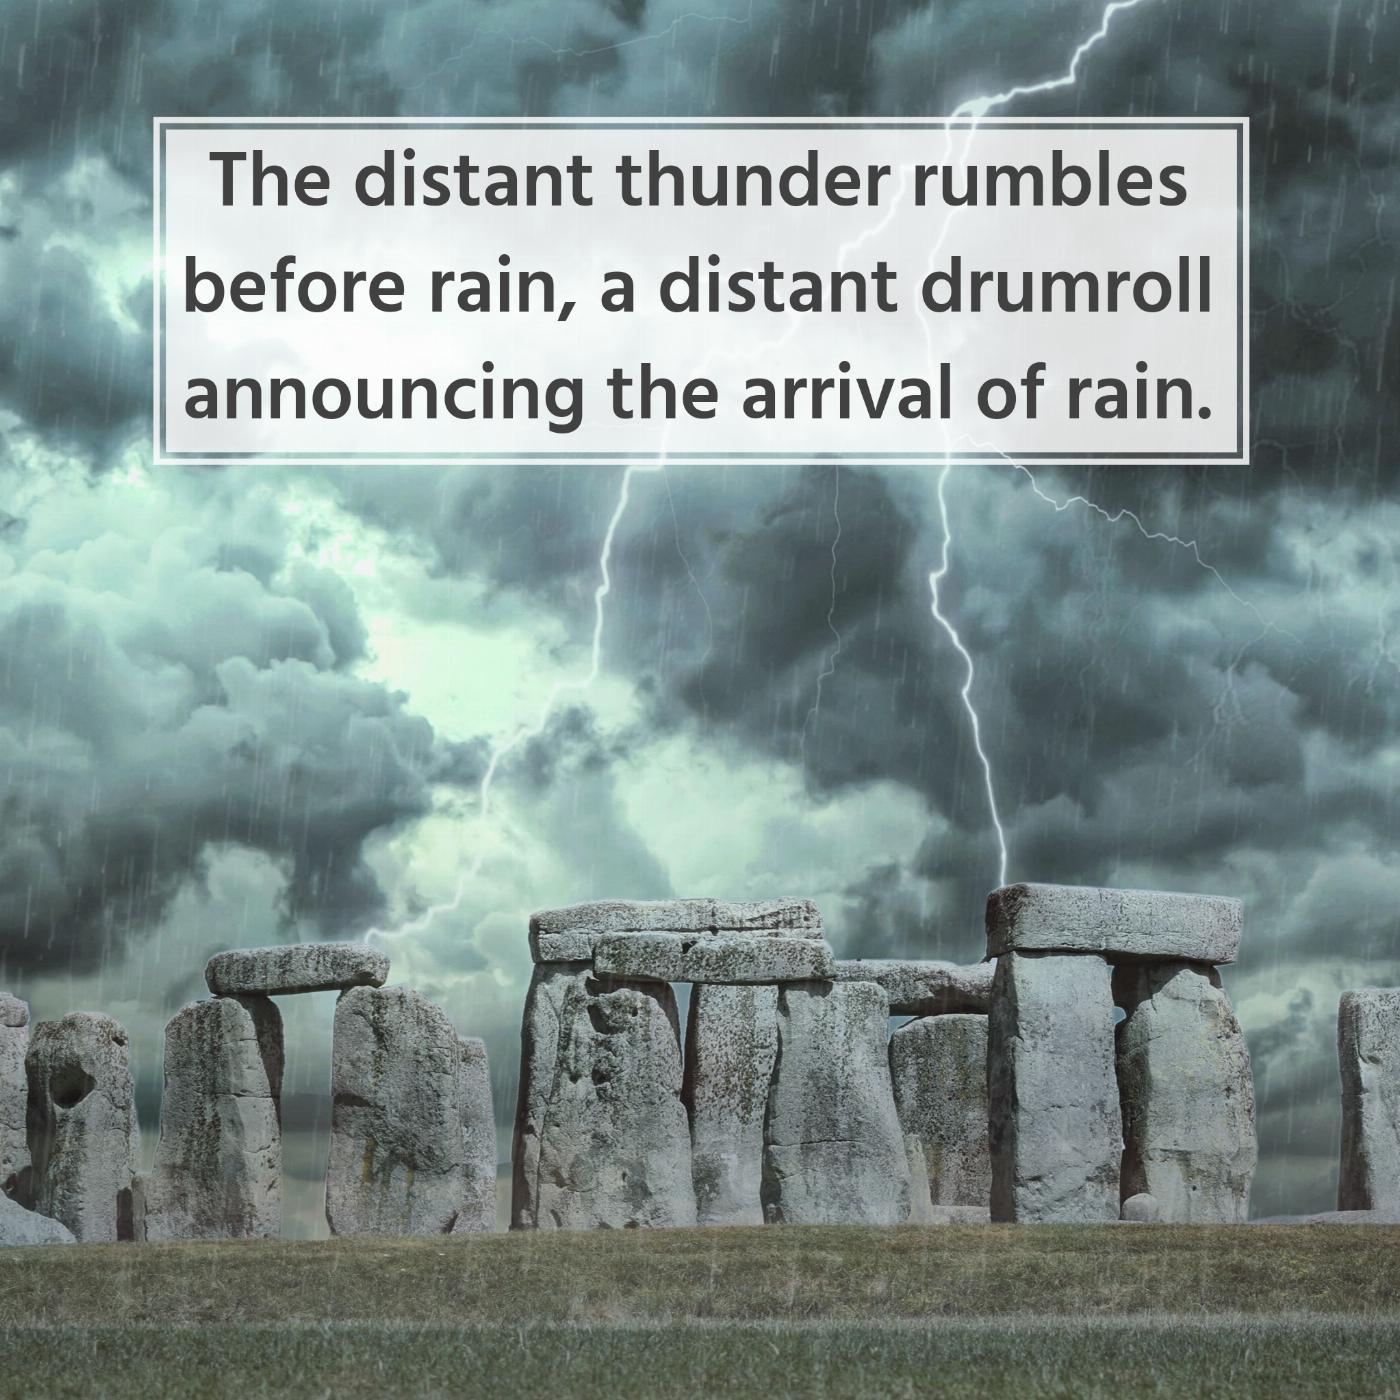 The distant thunder rumbles before rain